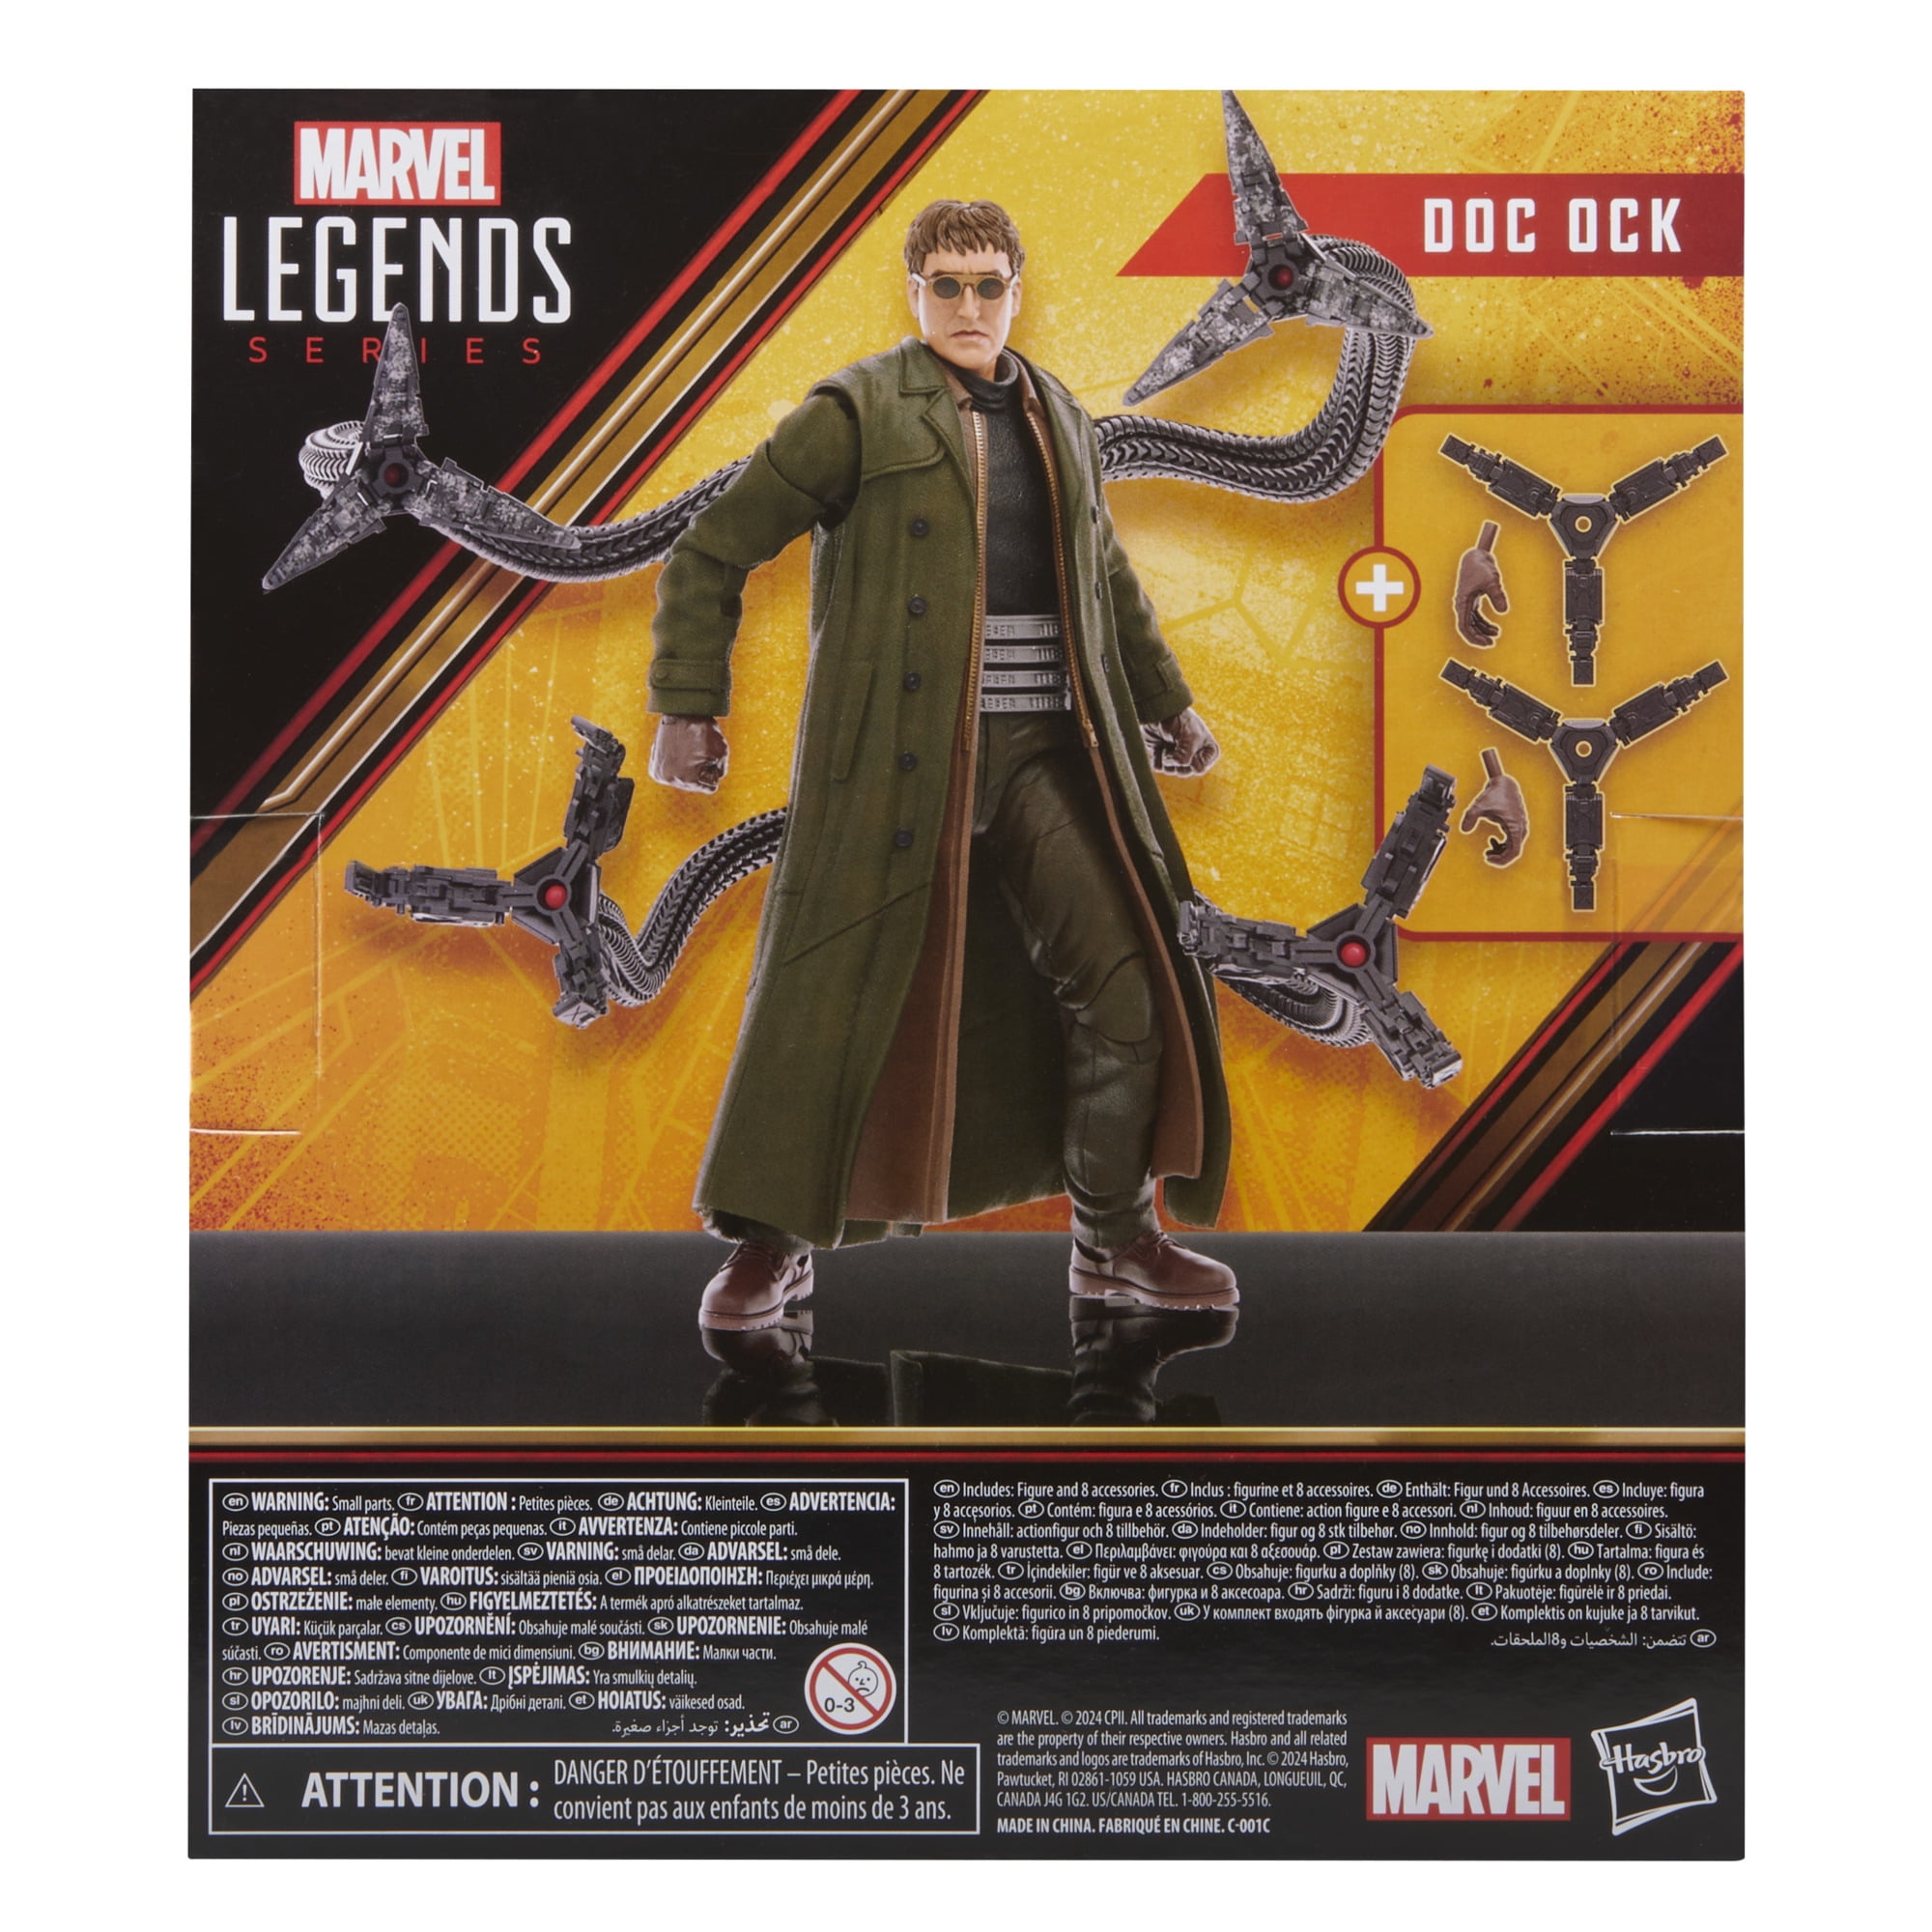 IsaacWongToys on X: [Marvel Legends] Spider-Man: No Way Home / Doctor  Octopus (Doc Ock) 🐙🕷️🕶️ Full Review:  # MarvelLegends #SHF #SHFiguarts #doctoroctopus #docock #SpiderMan #NoWayHome  #PeterParker #TomHolland